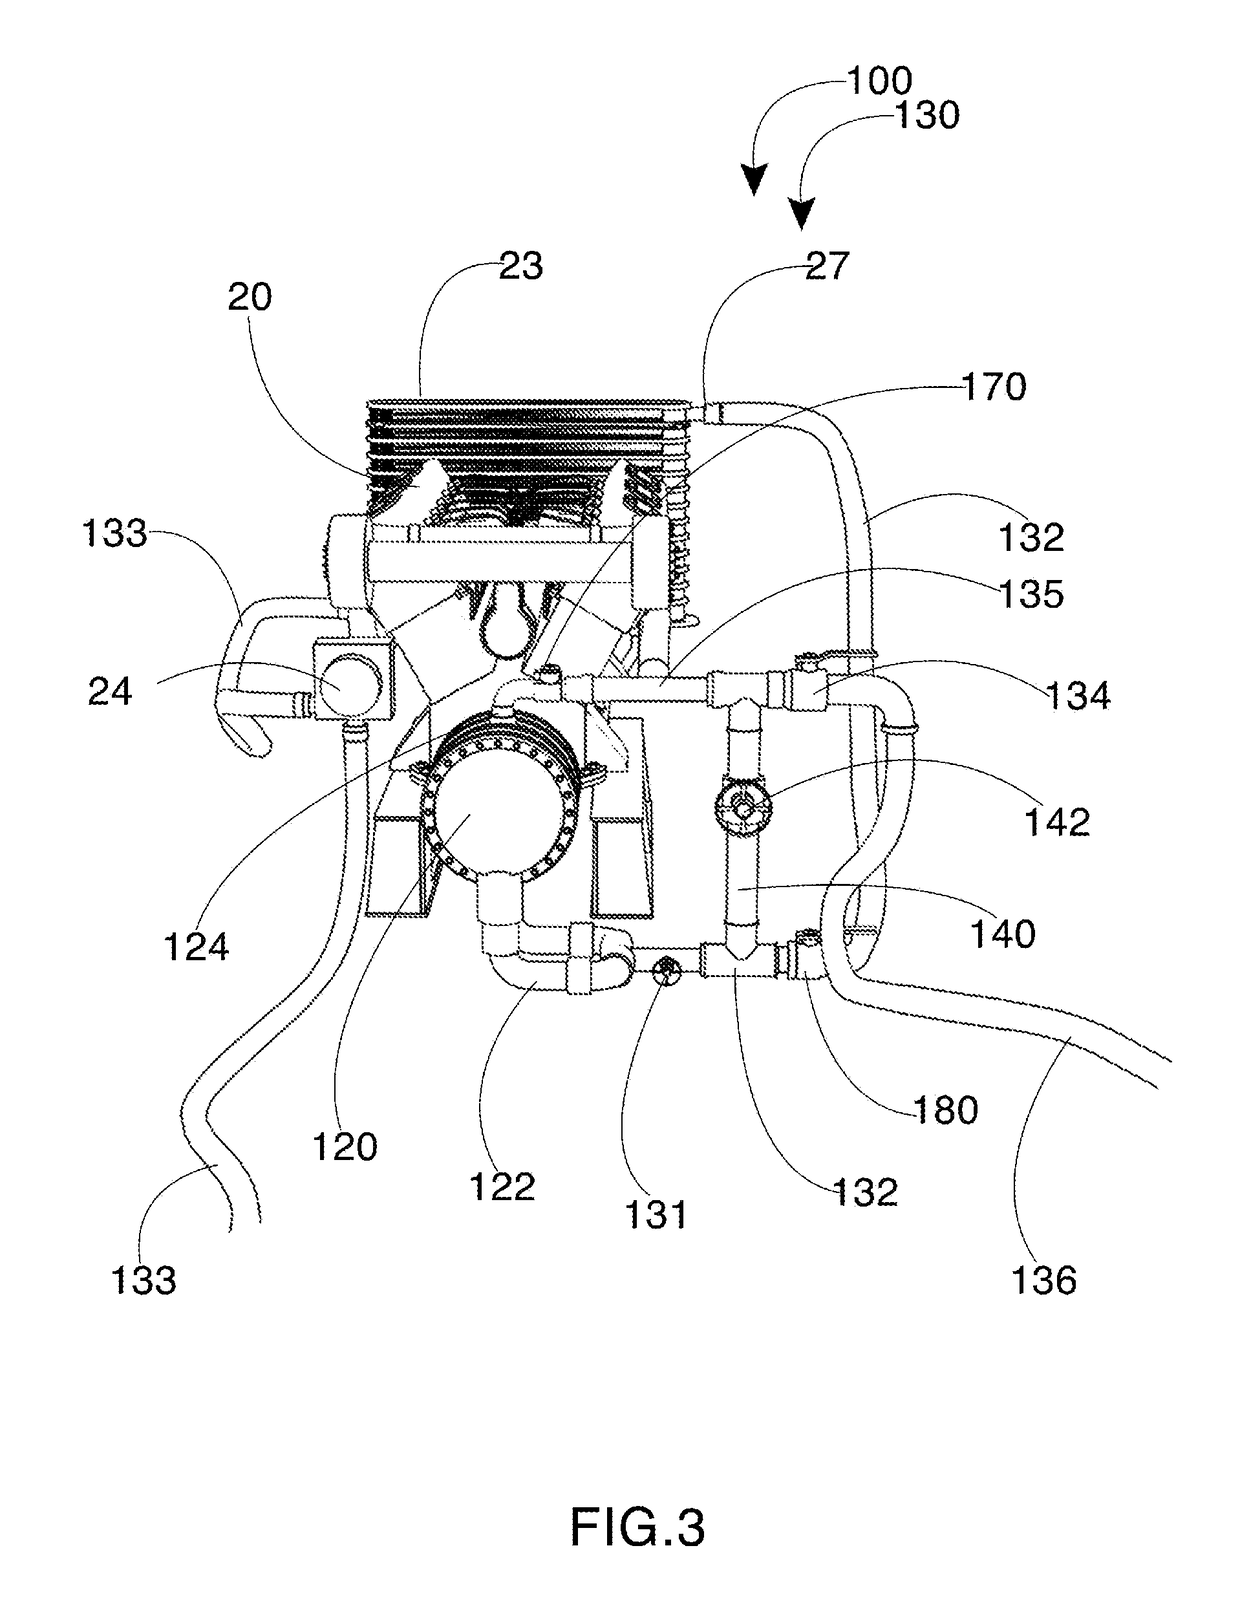 System and methods for testing an engine